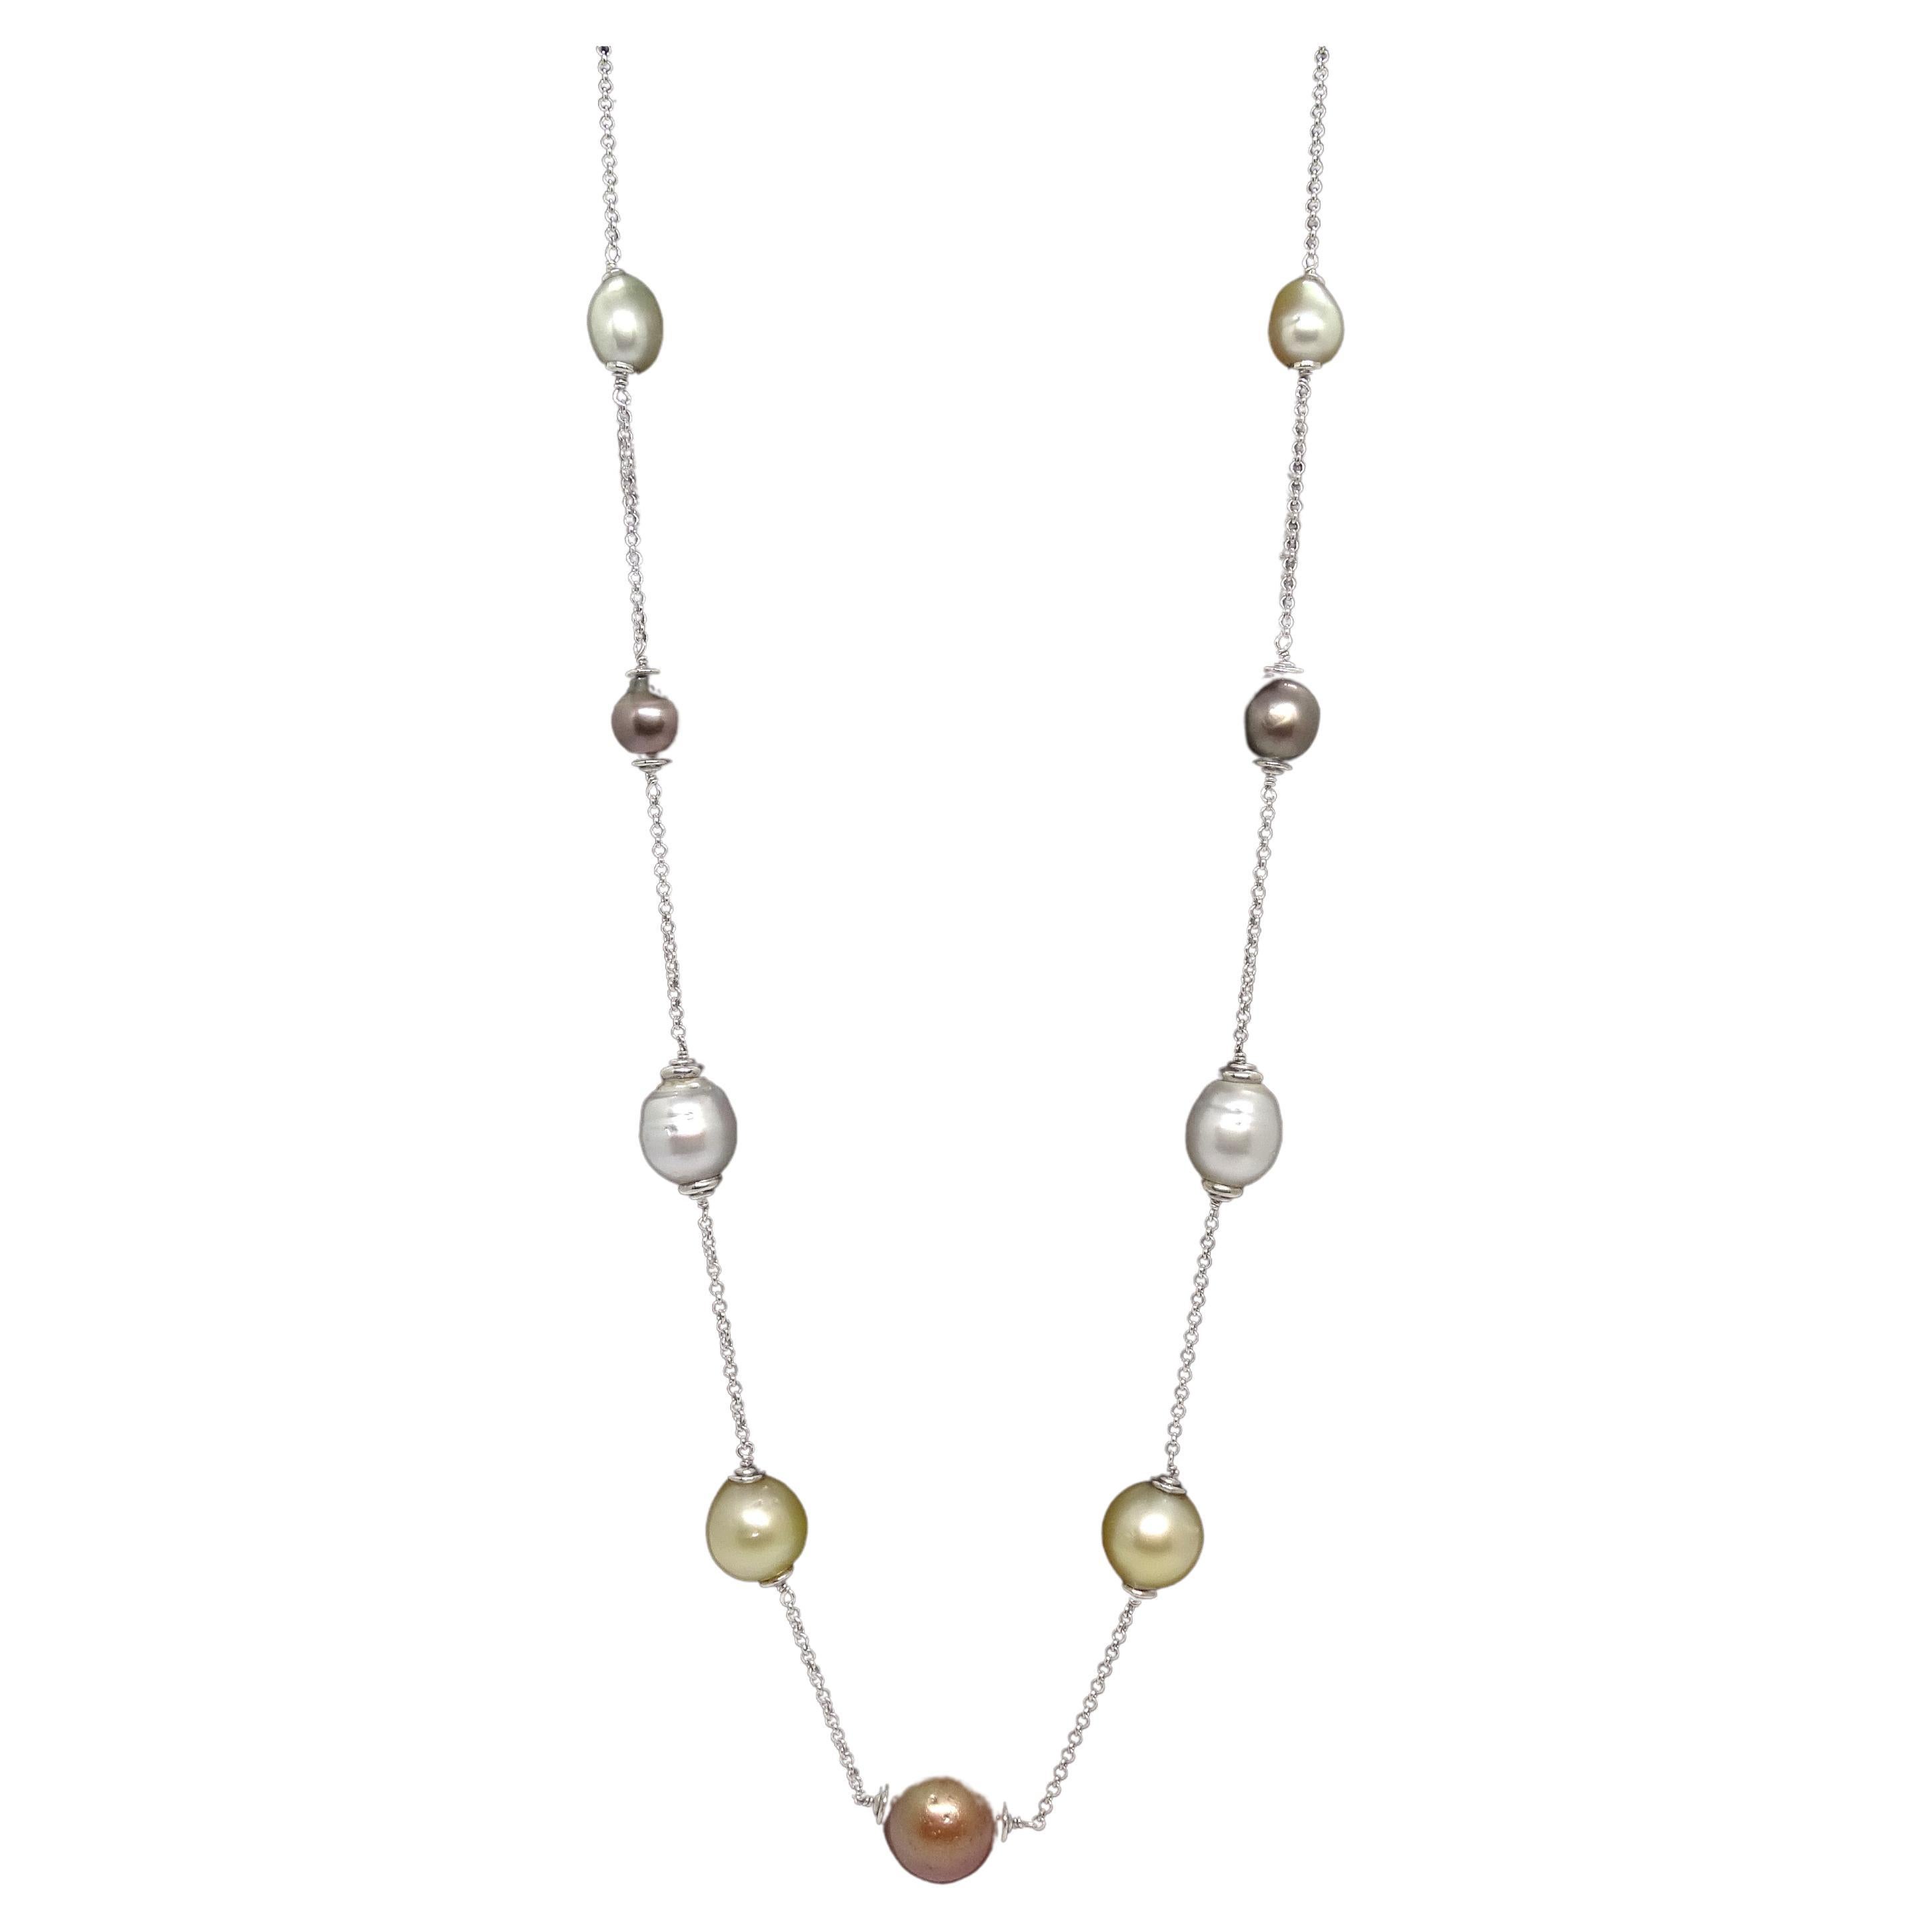 Australian, golden, tahitian and chocolate pearl necklace - white gold chain